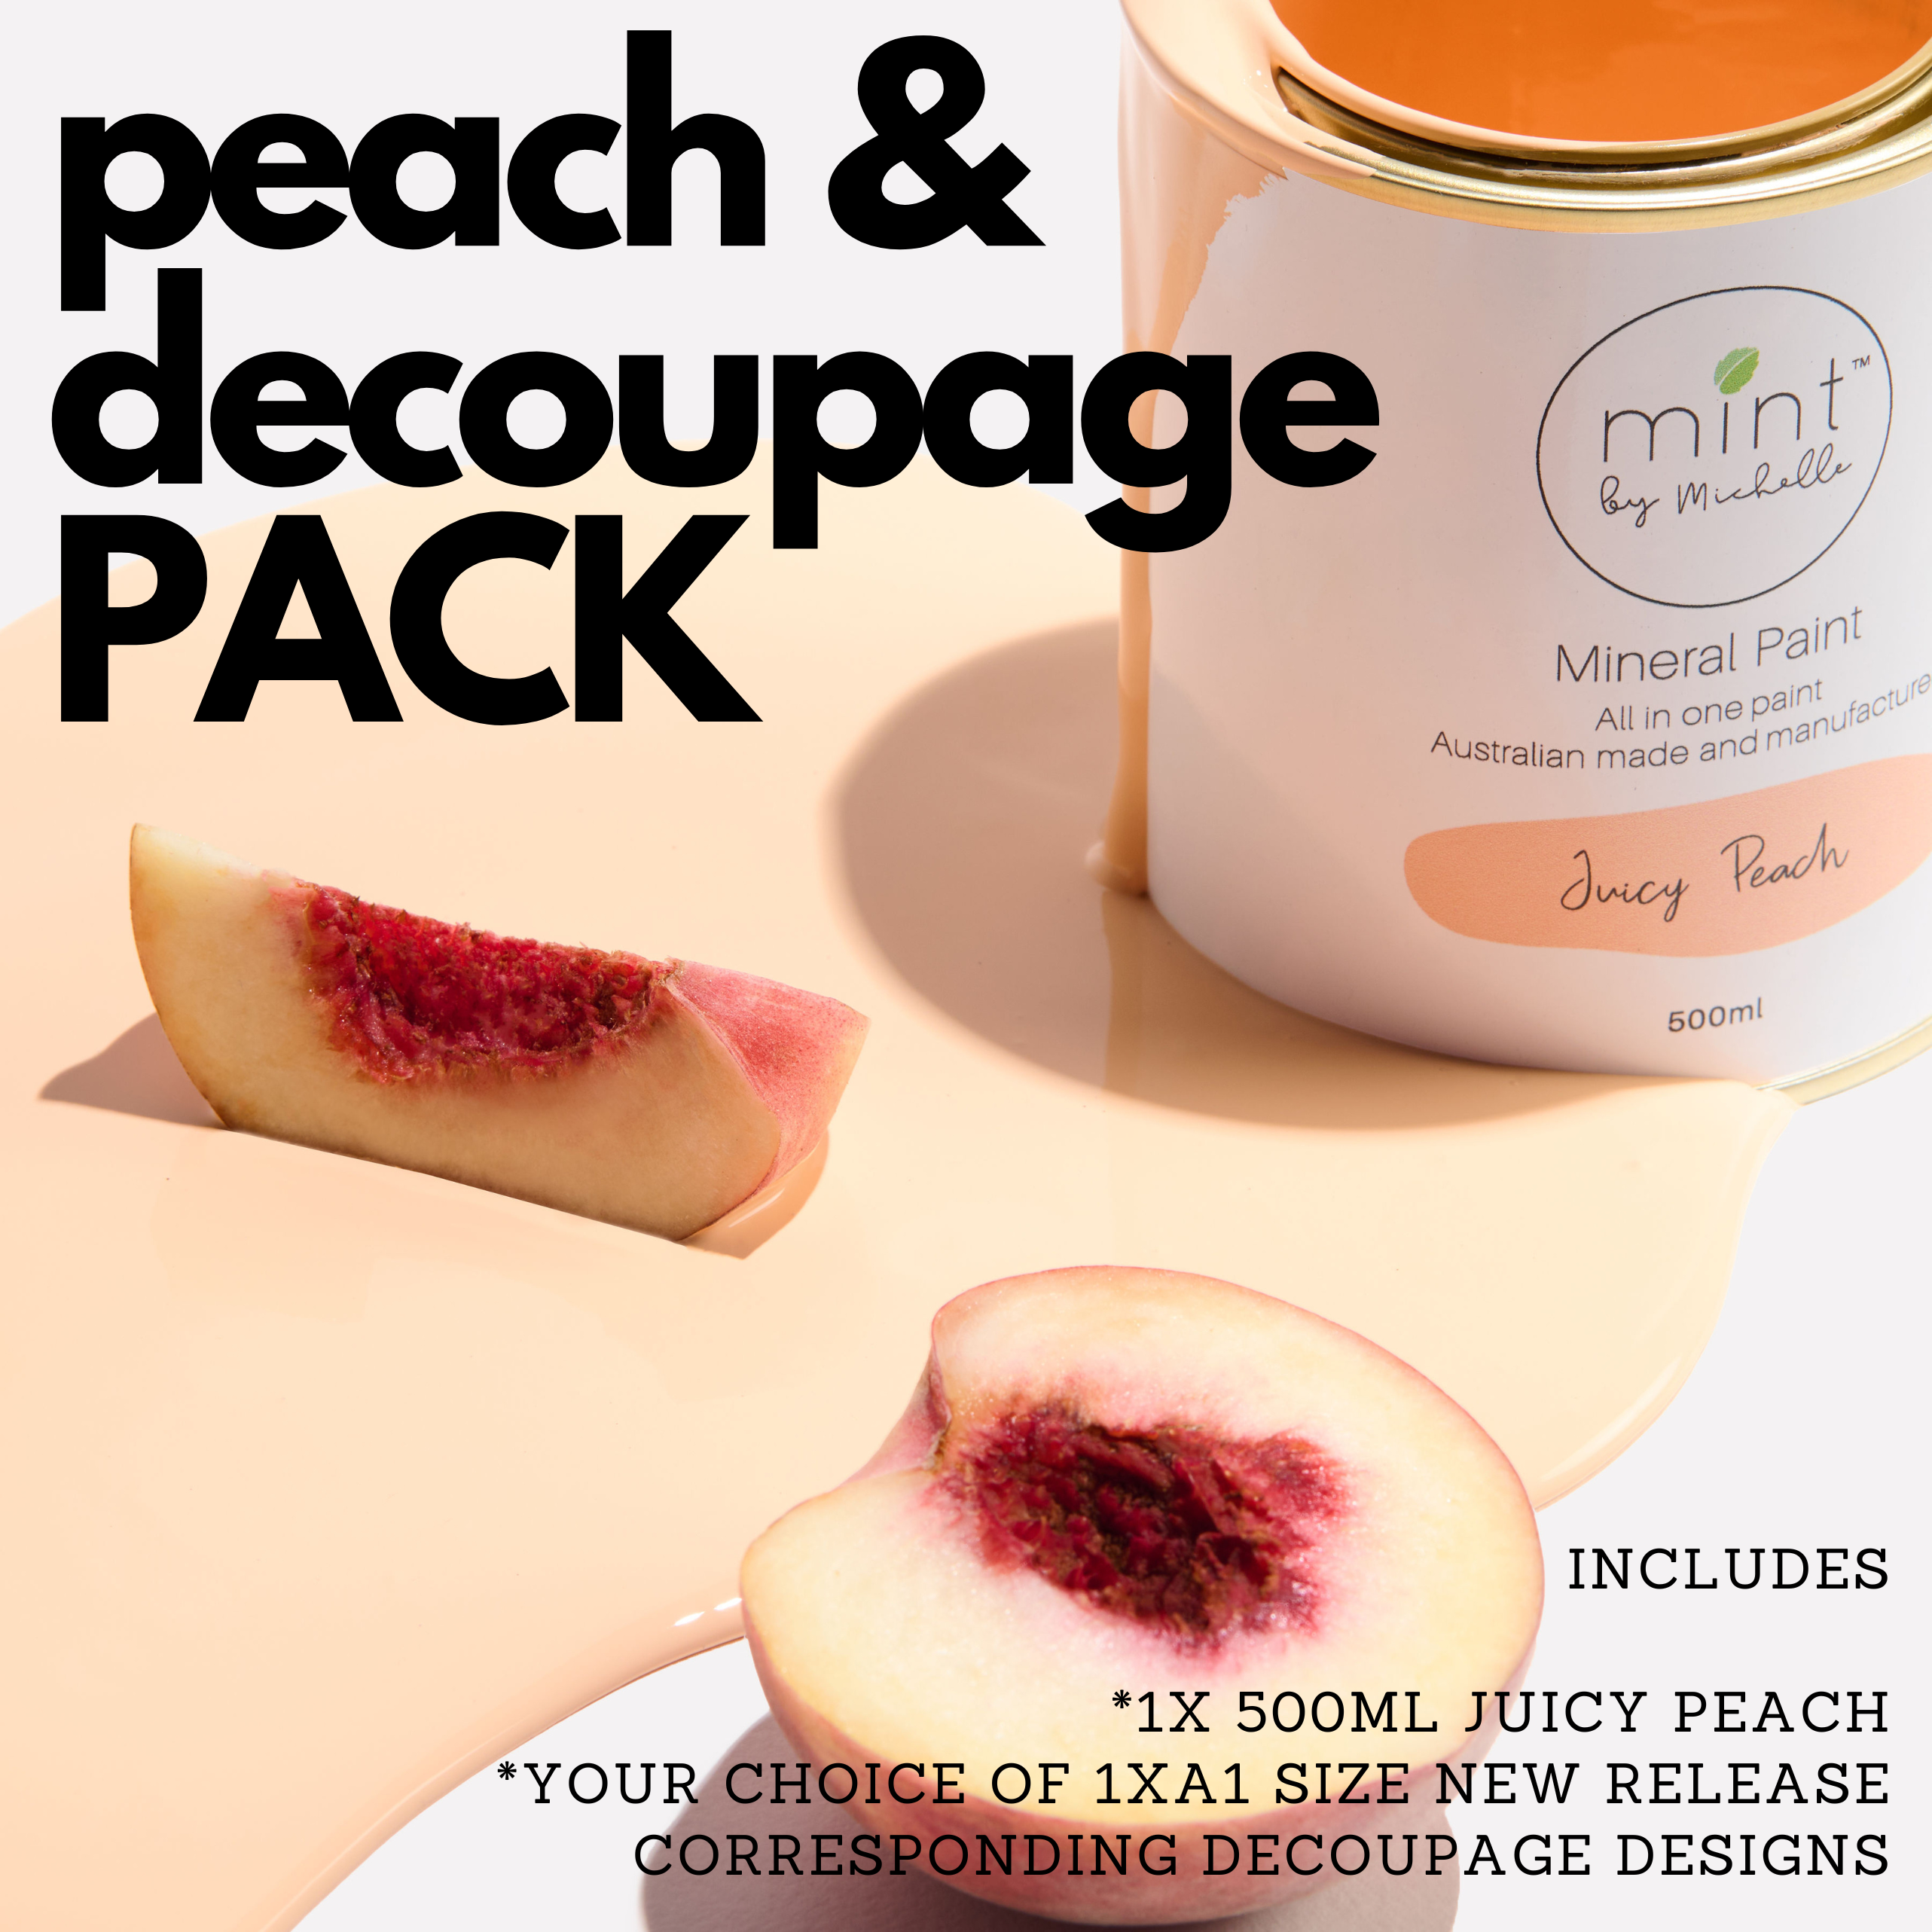 Peach & Decoupage PACK - NEW RELEASE!